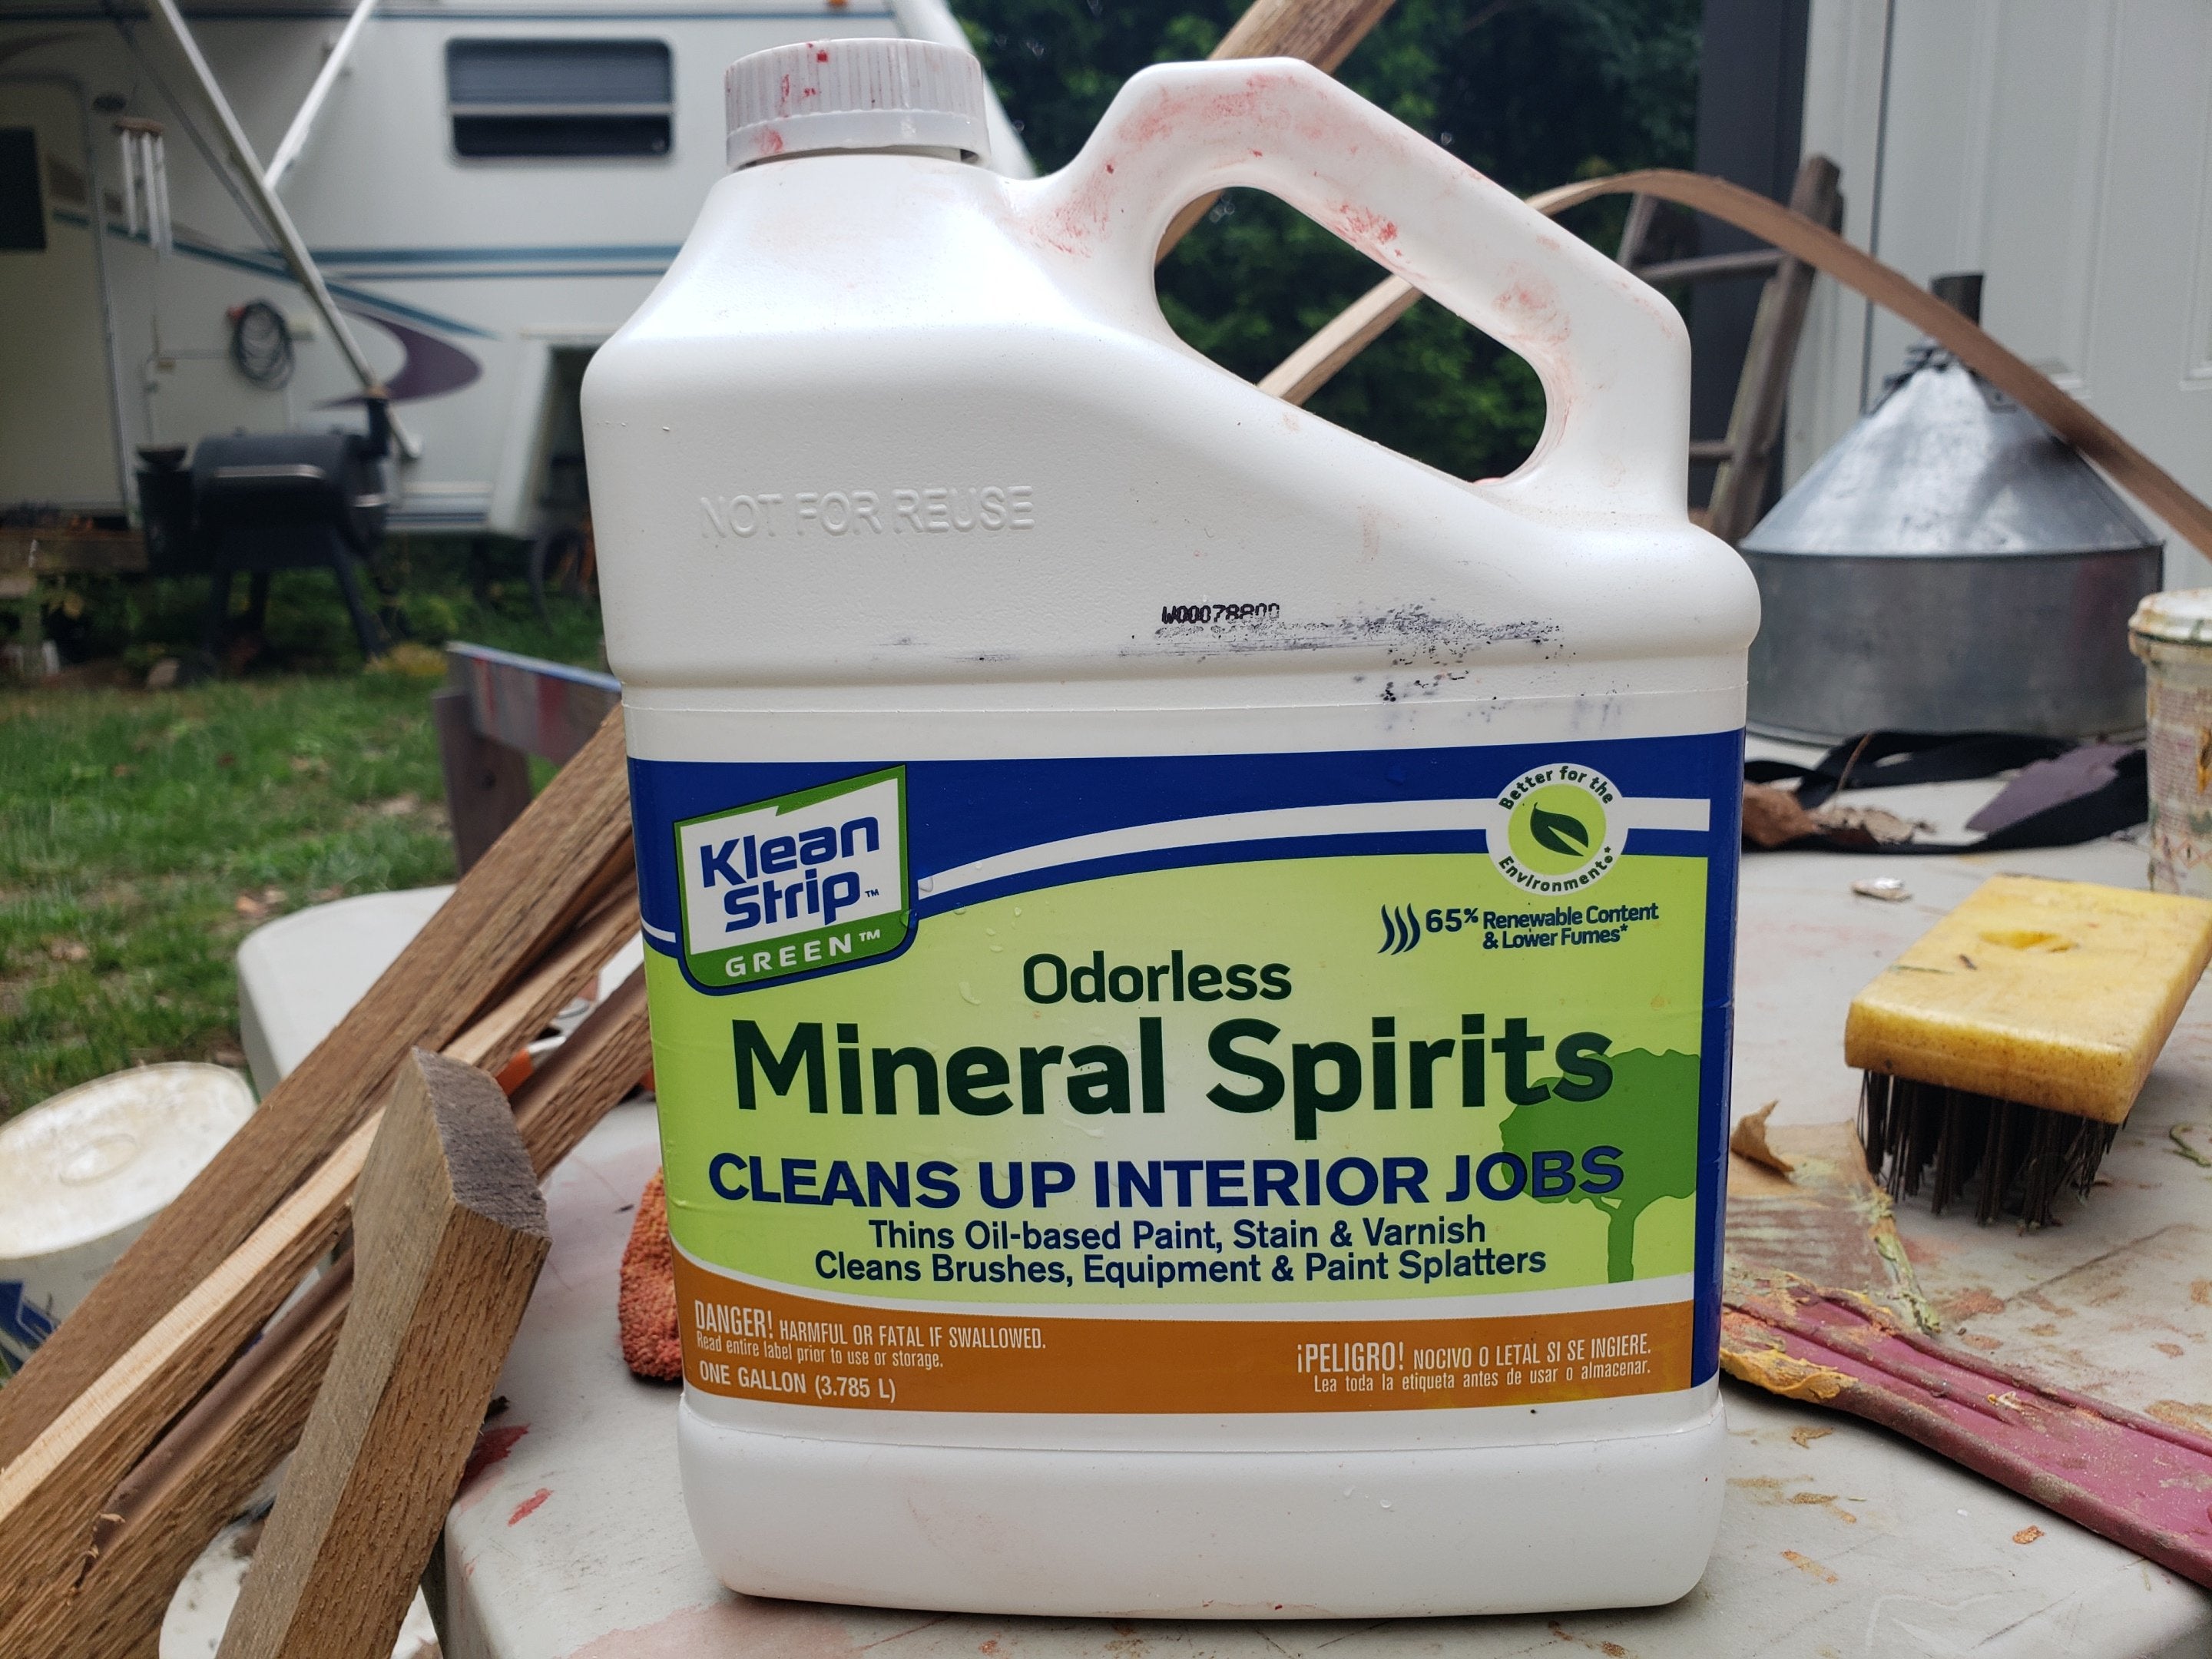 Using Mineral Spirits on Wood